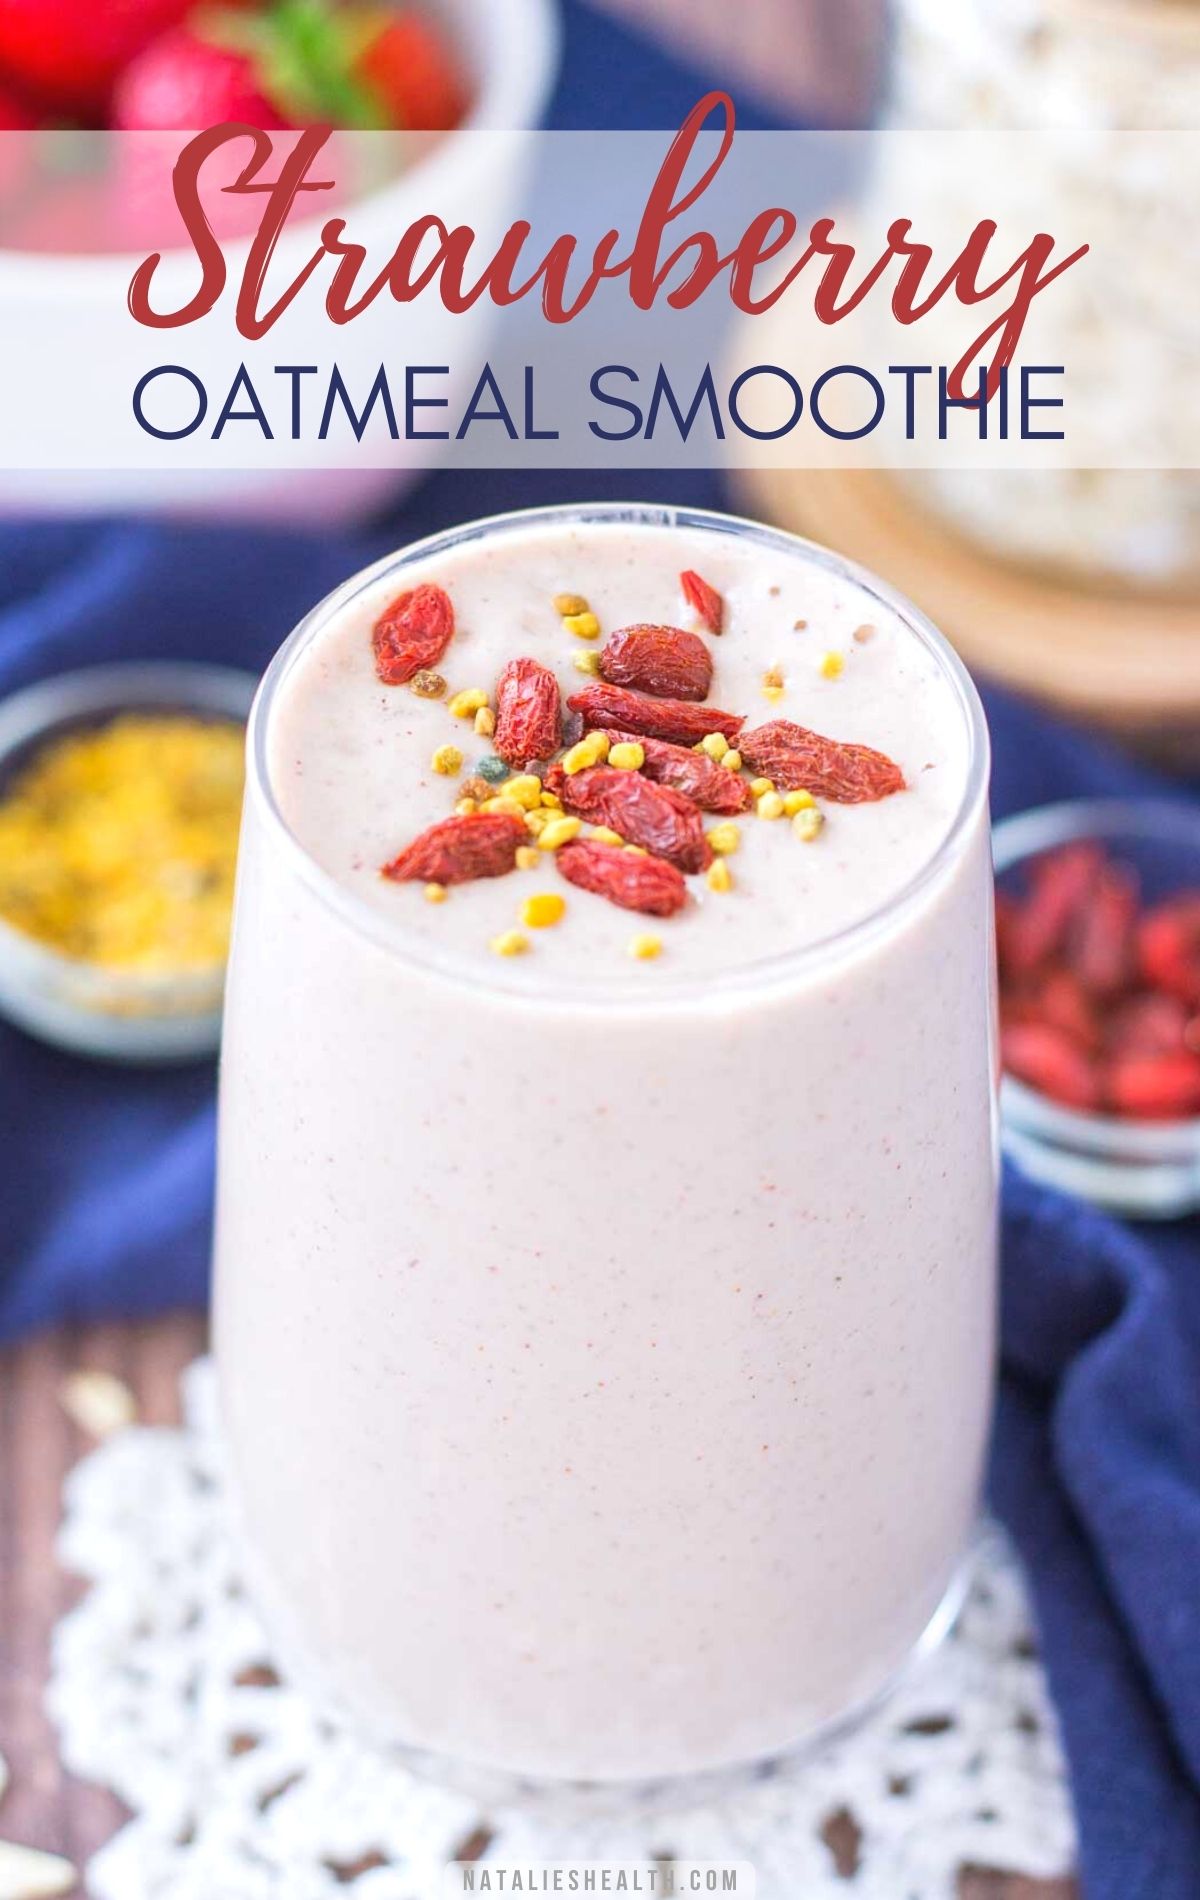 Strawberry Oatmeal Smoothie PIN image